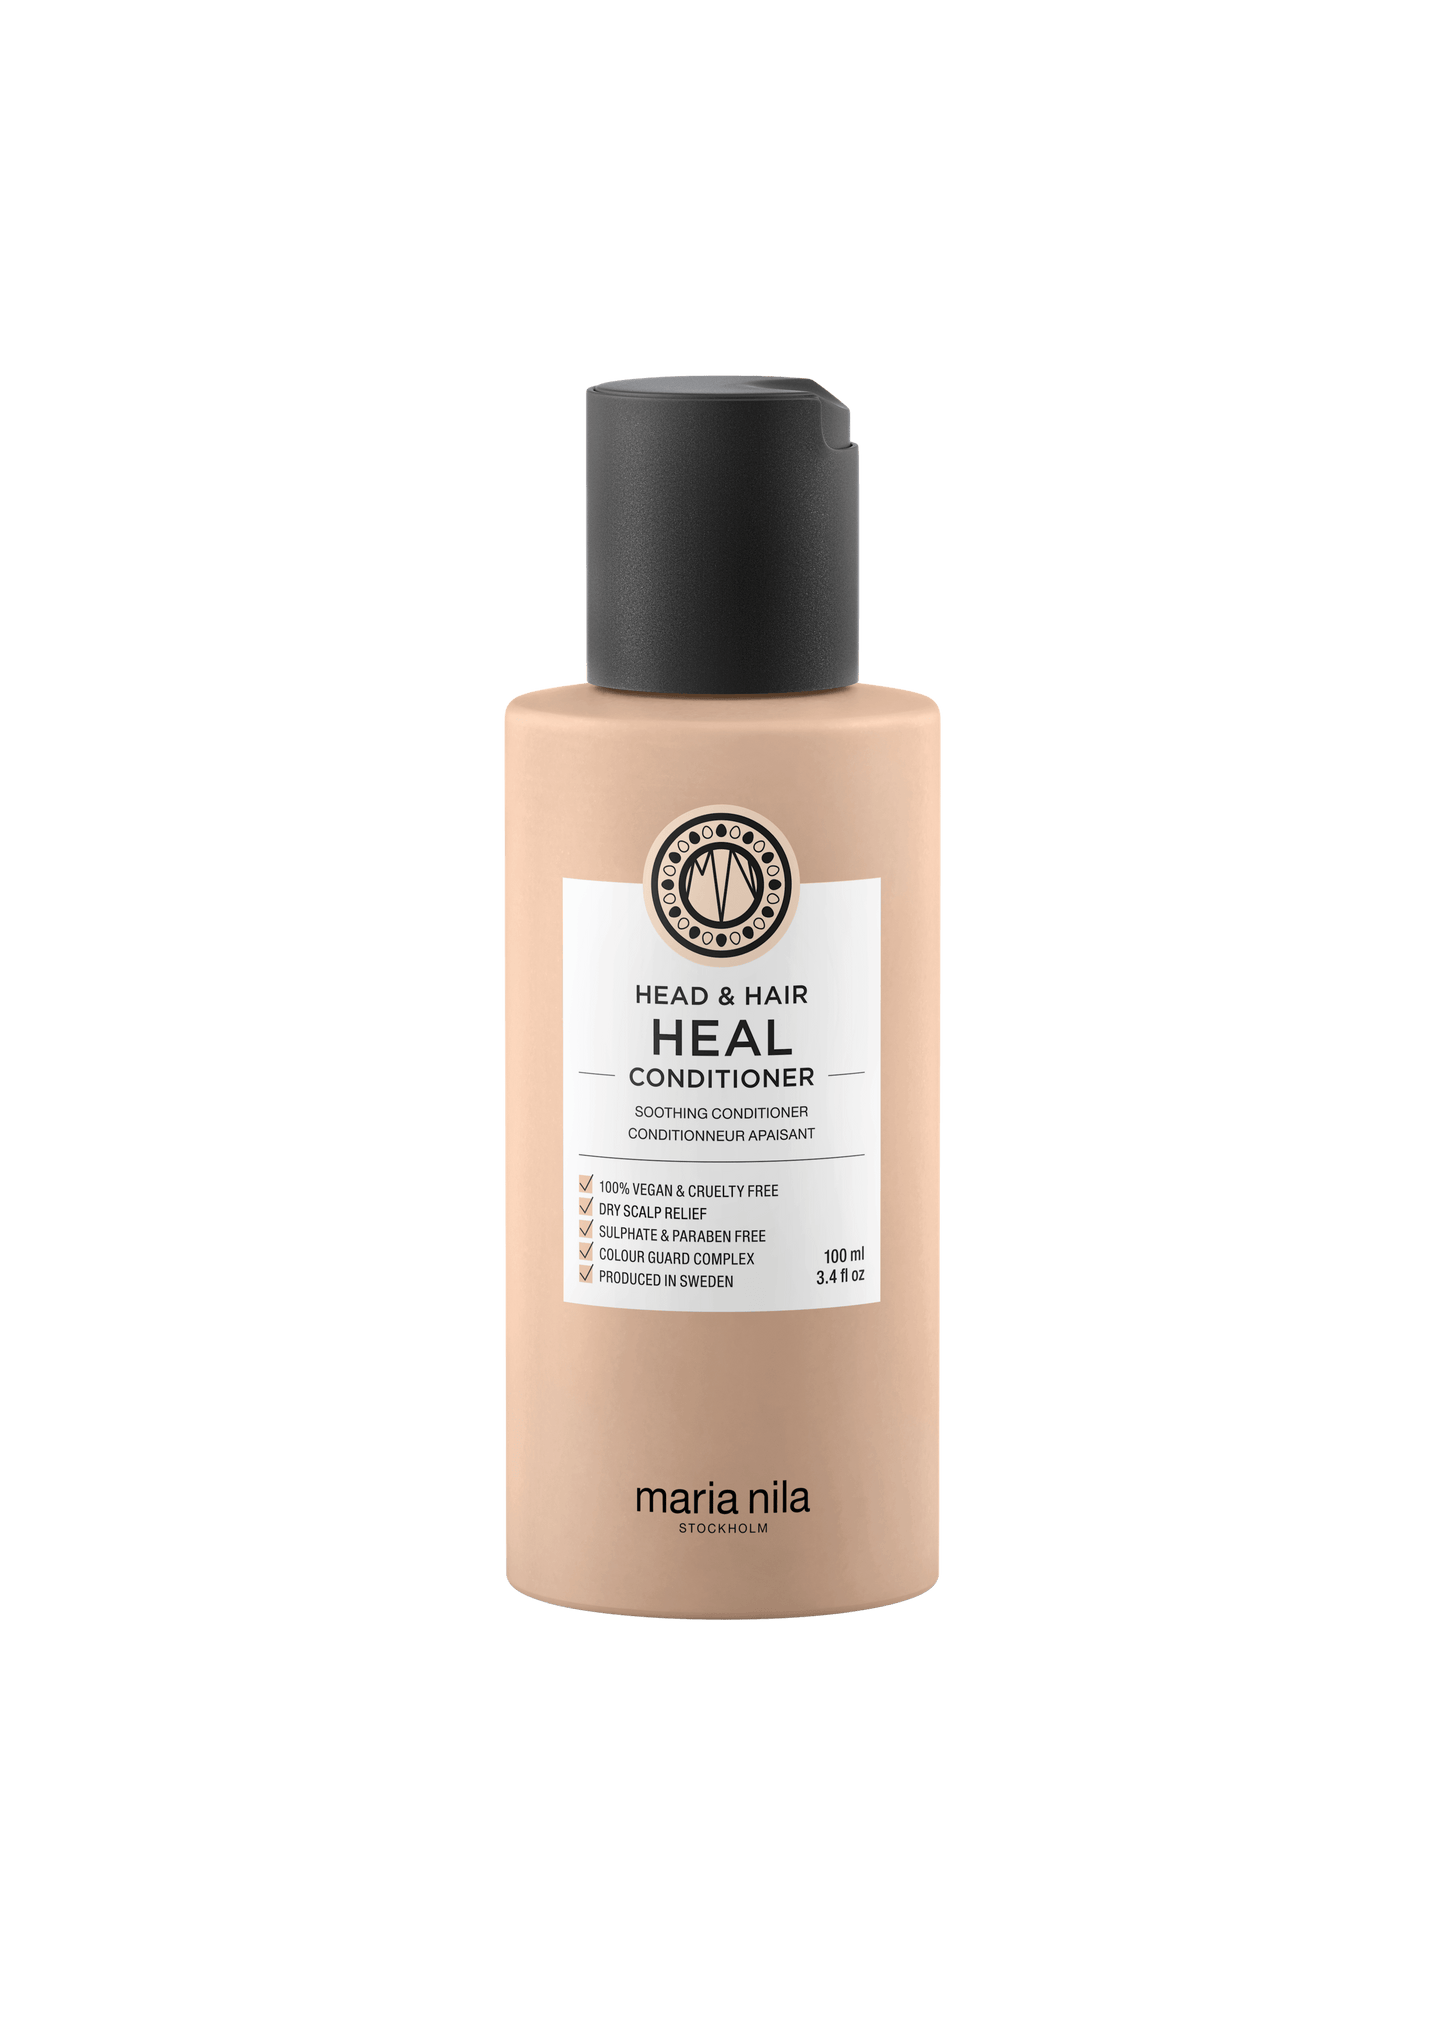 Head & Hair Heal Conditioner - The Coloroom 